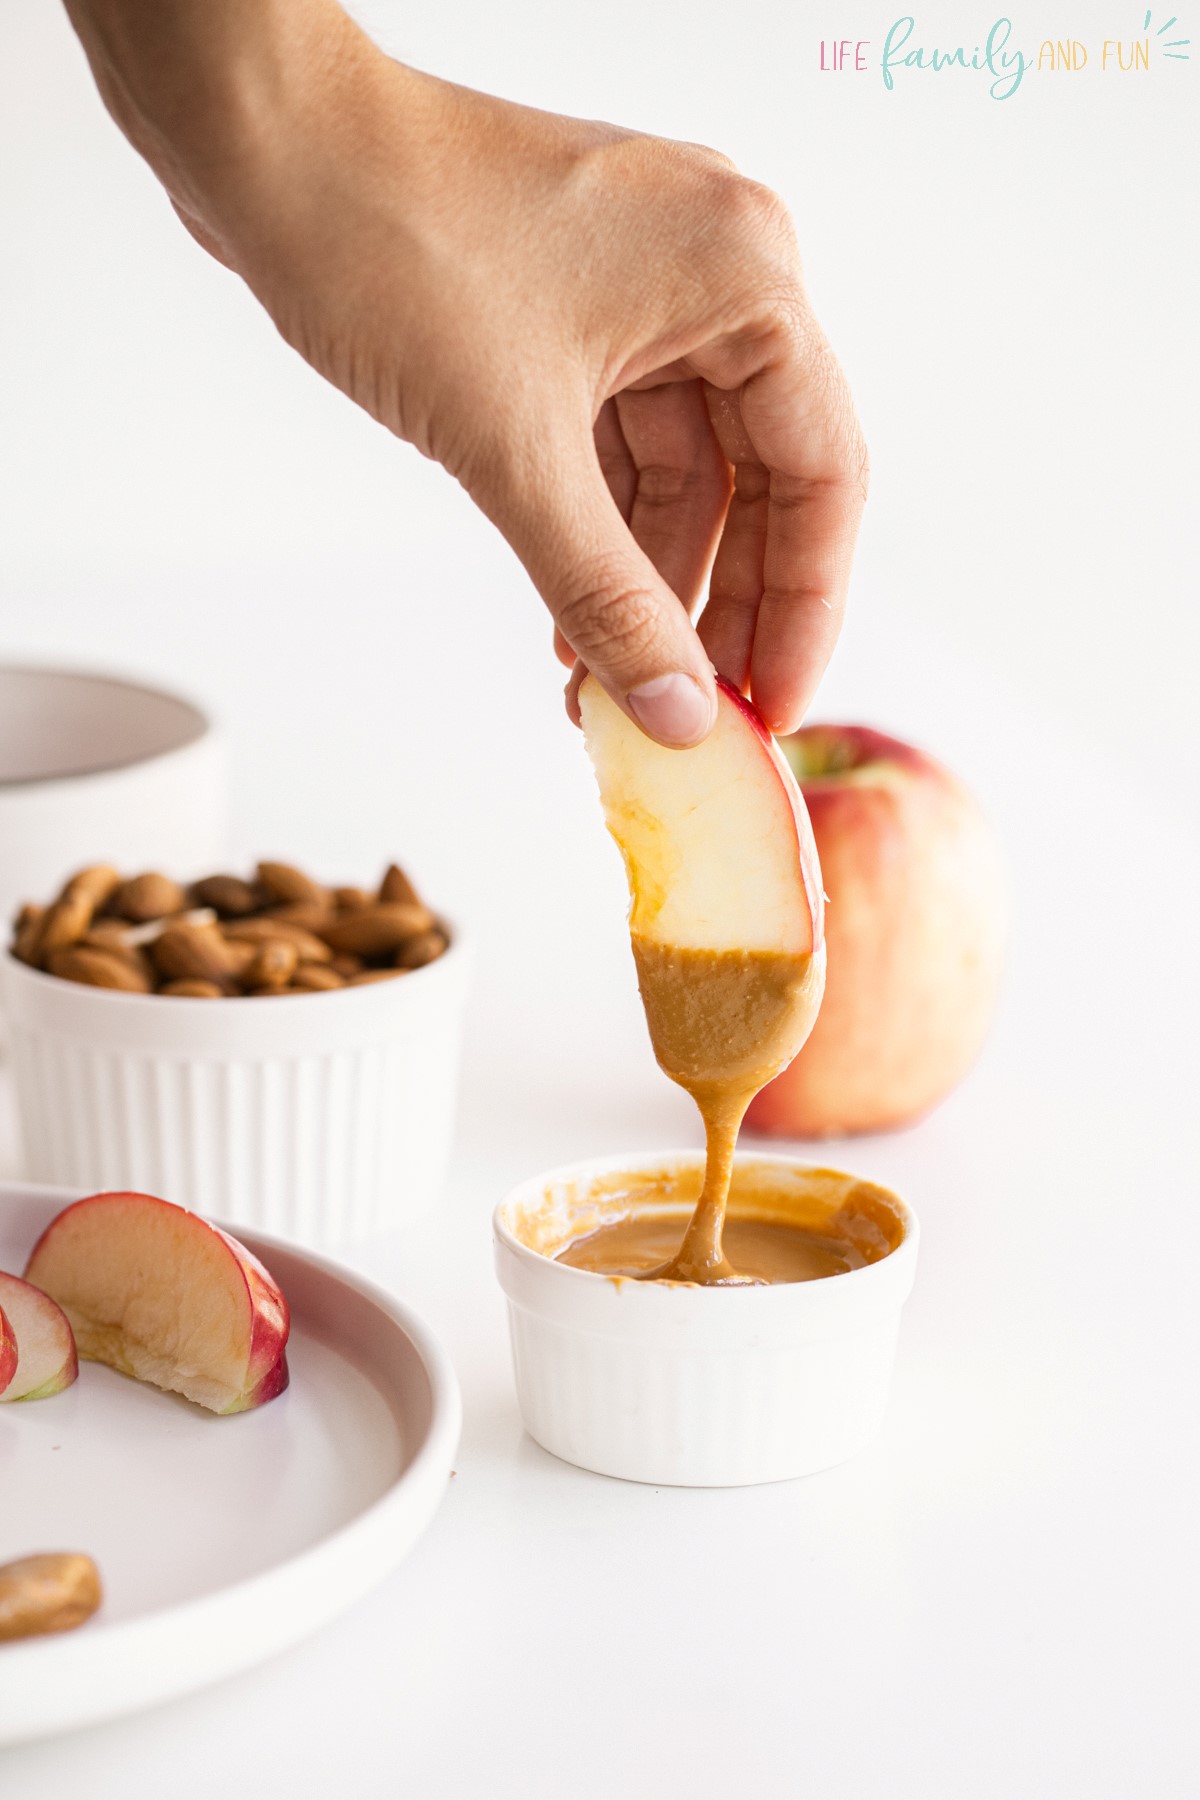 Apple Slices with Peanut Butter - delicious recipe